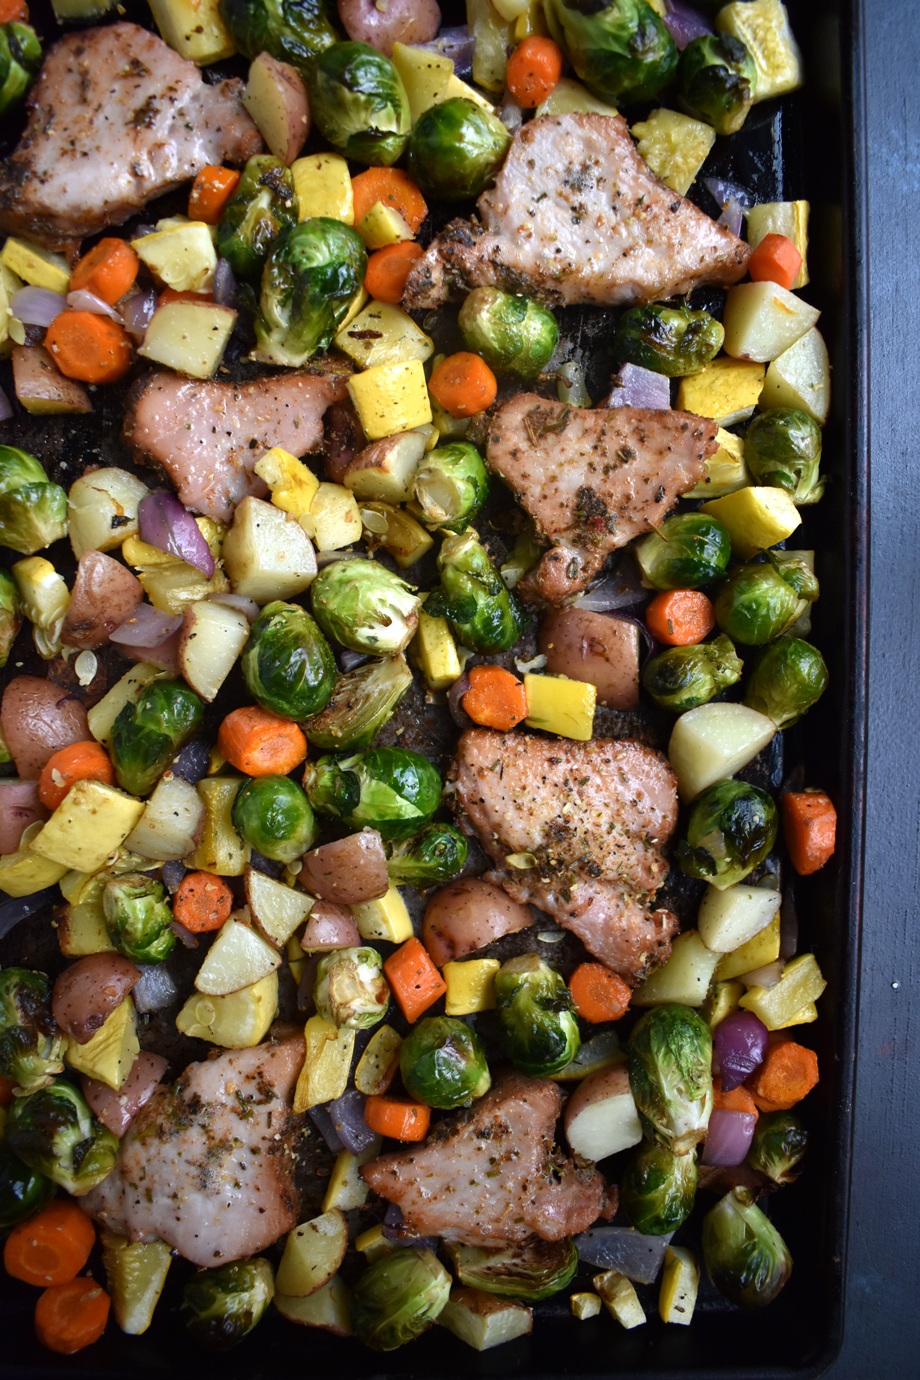 Sheet Pan Garlic Herb Pork and Vegetables is ready in 30 minutes, is full of flavor and only uses one pan for a nutritious and tasty family friendly meal! www.nutritionistreviews.com